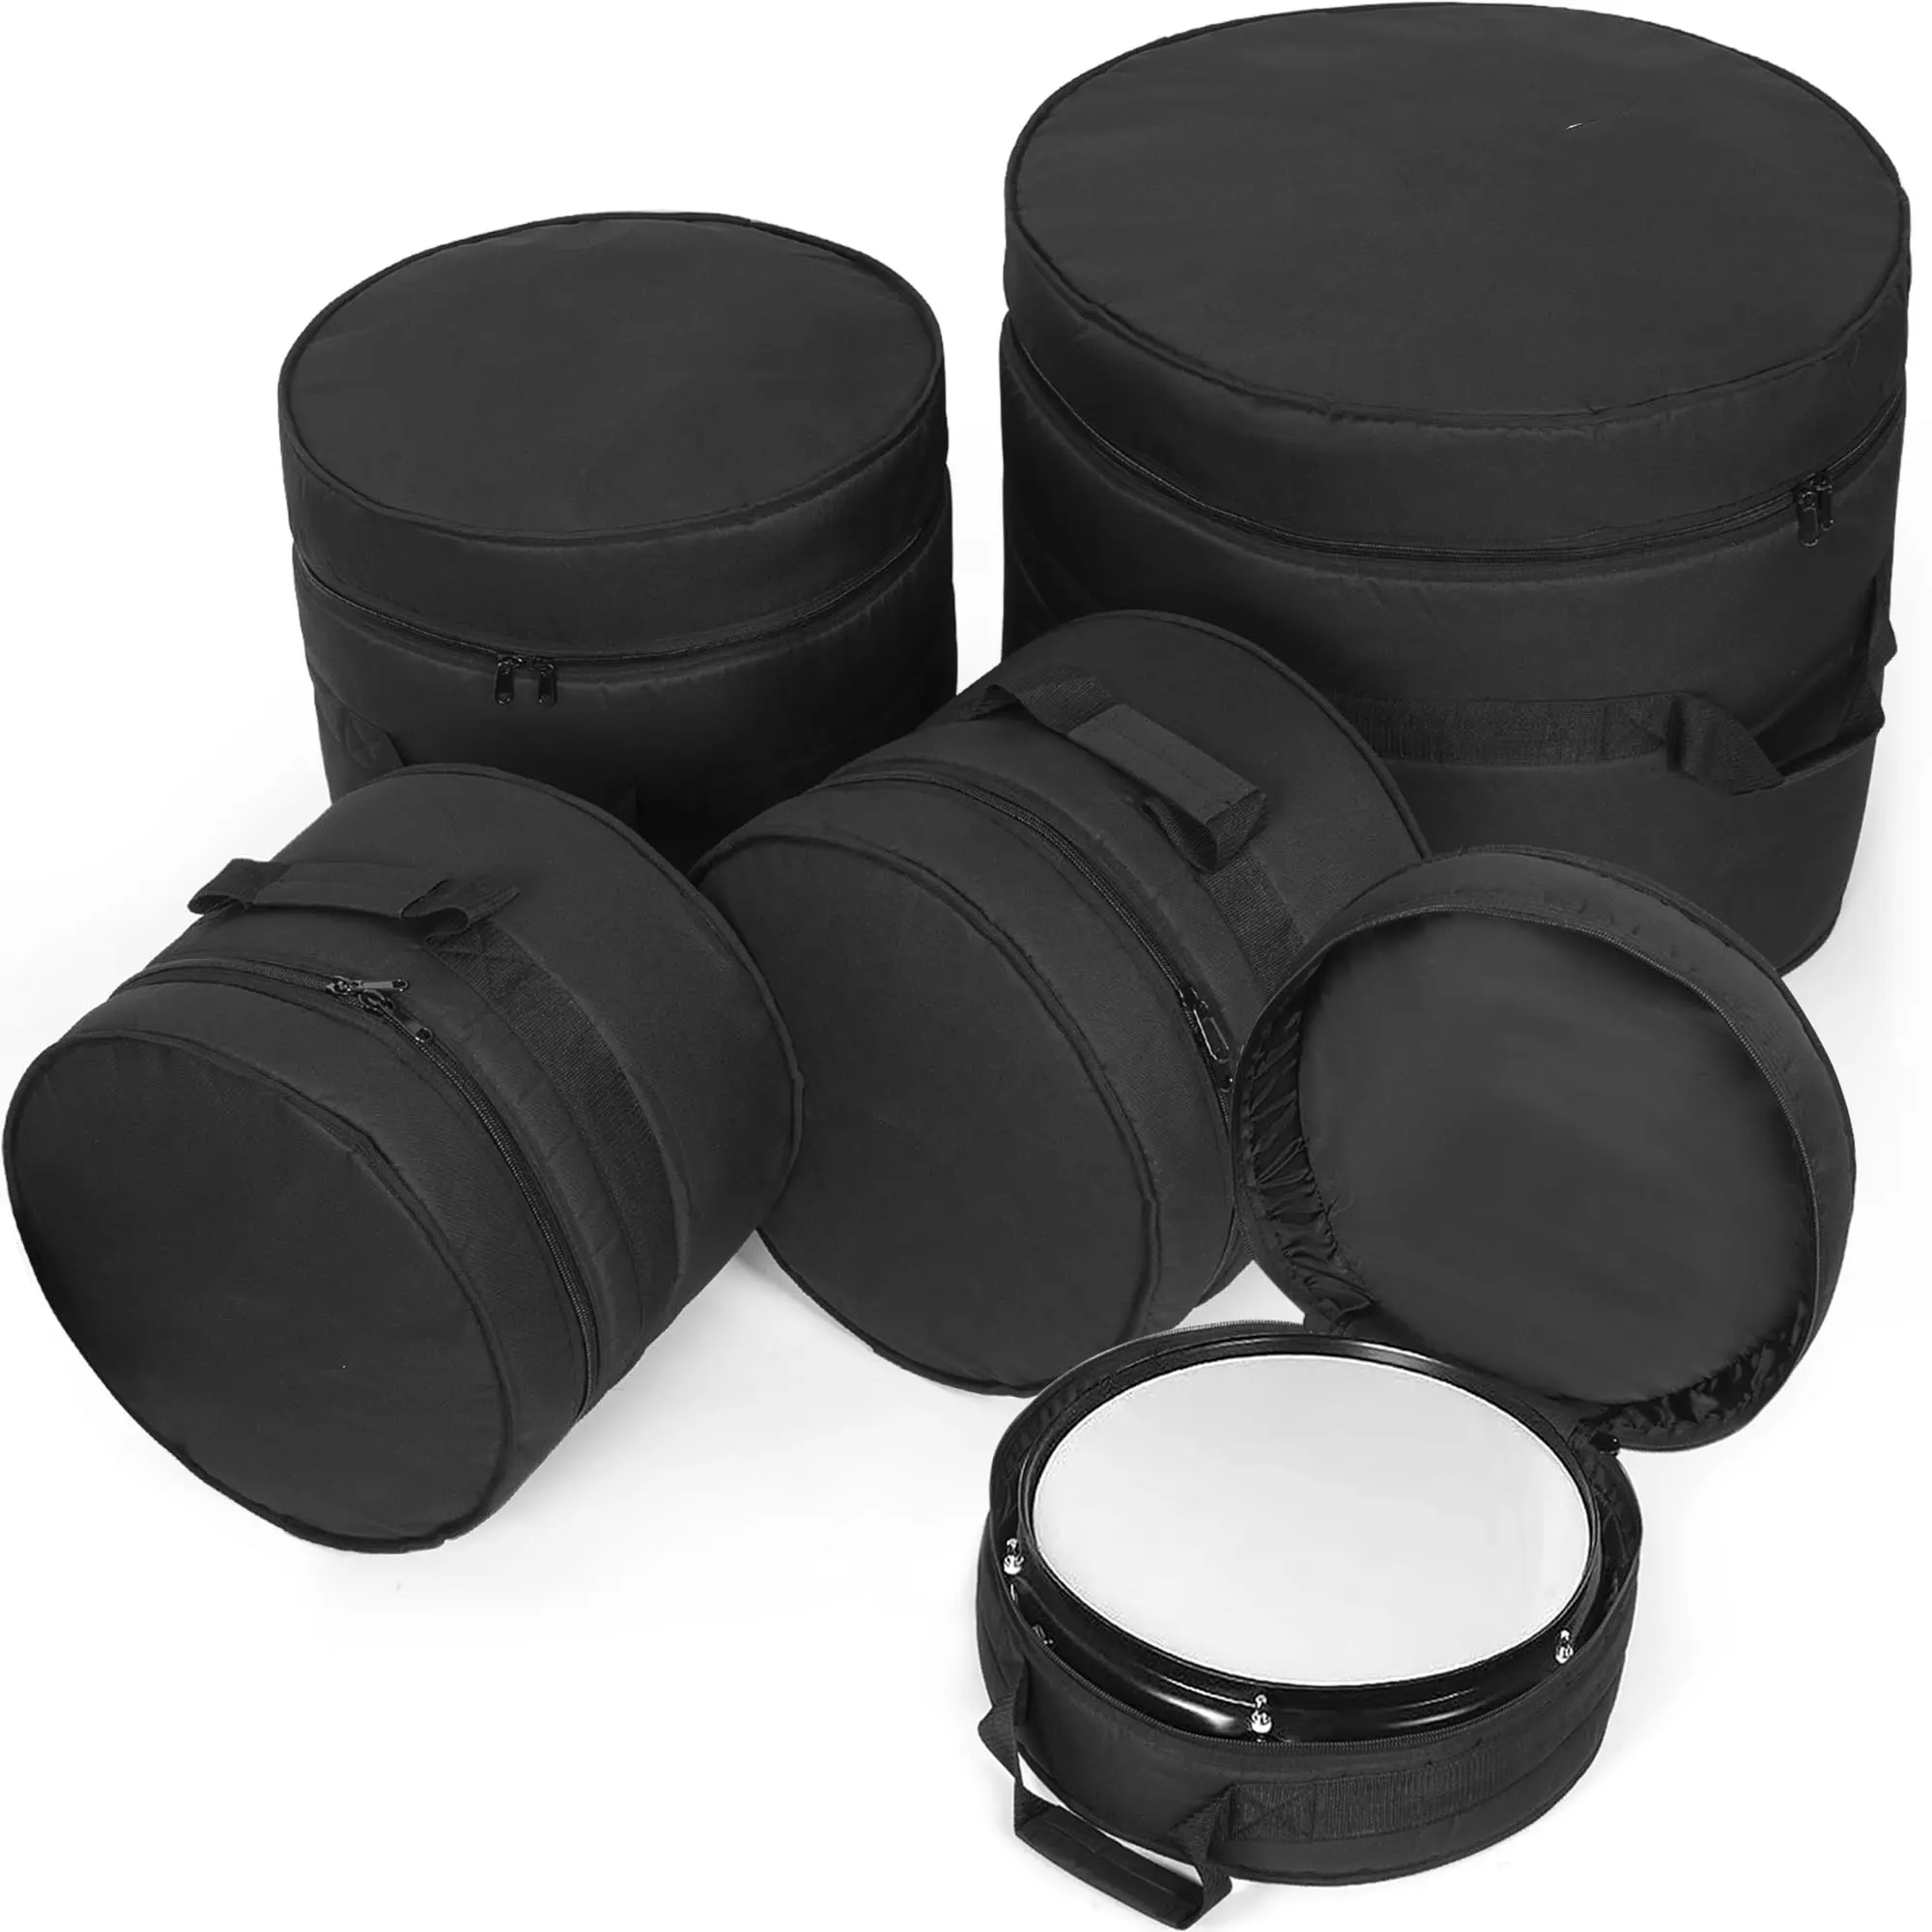 10mm Thick Padded Drum Bag Set Snare & Bass Drum Cases for 12" Tom Floor Tom for Bass & Drum Players